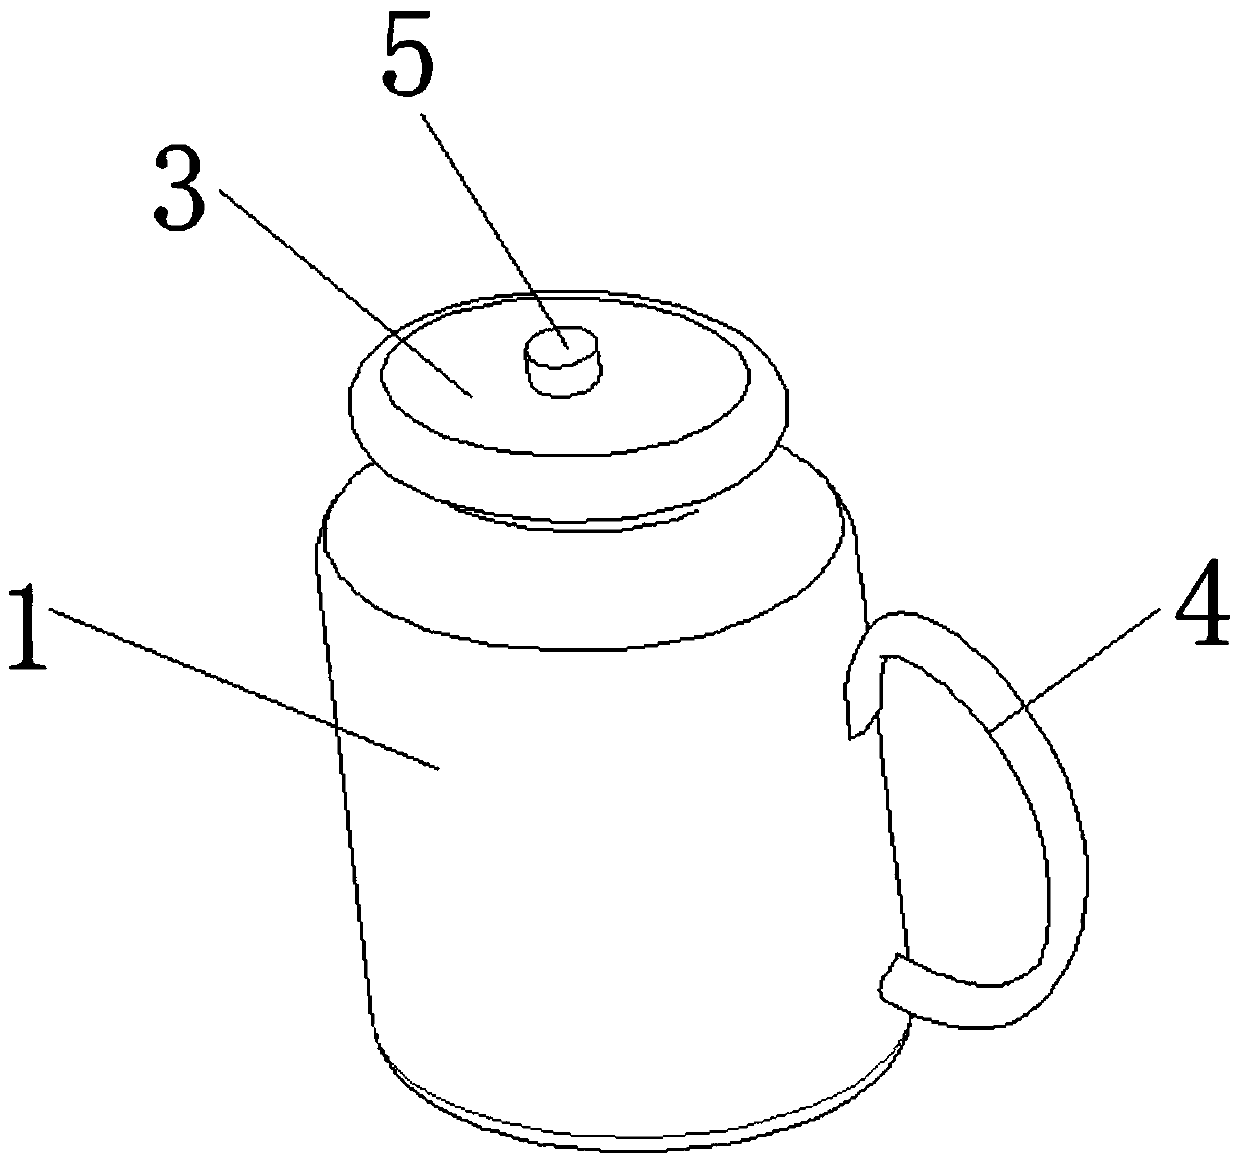 Lifting-type self-adaptive local-heating electric kettle